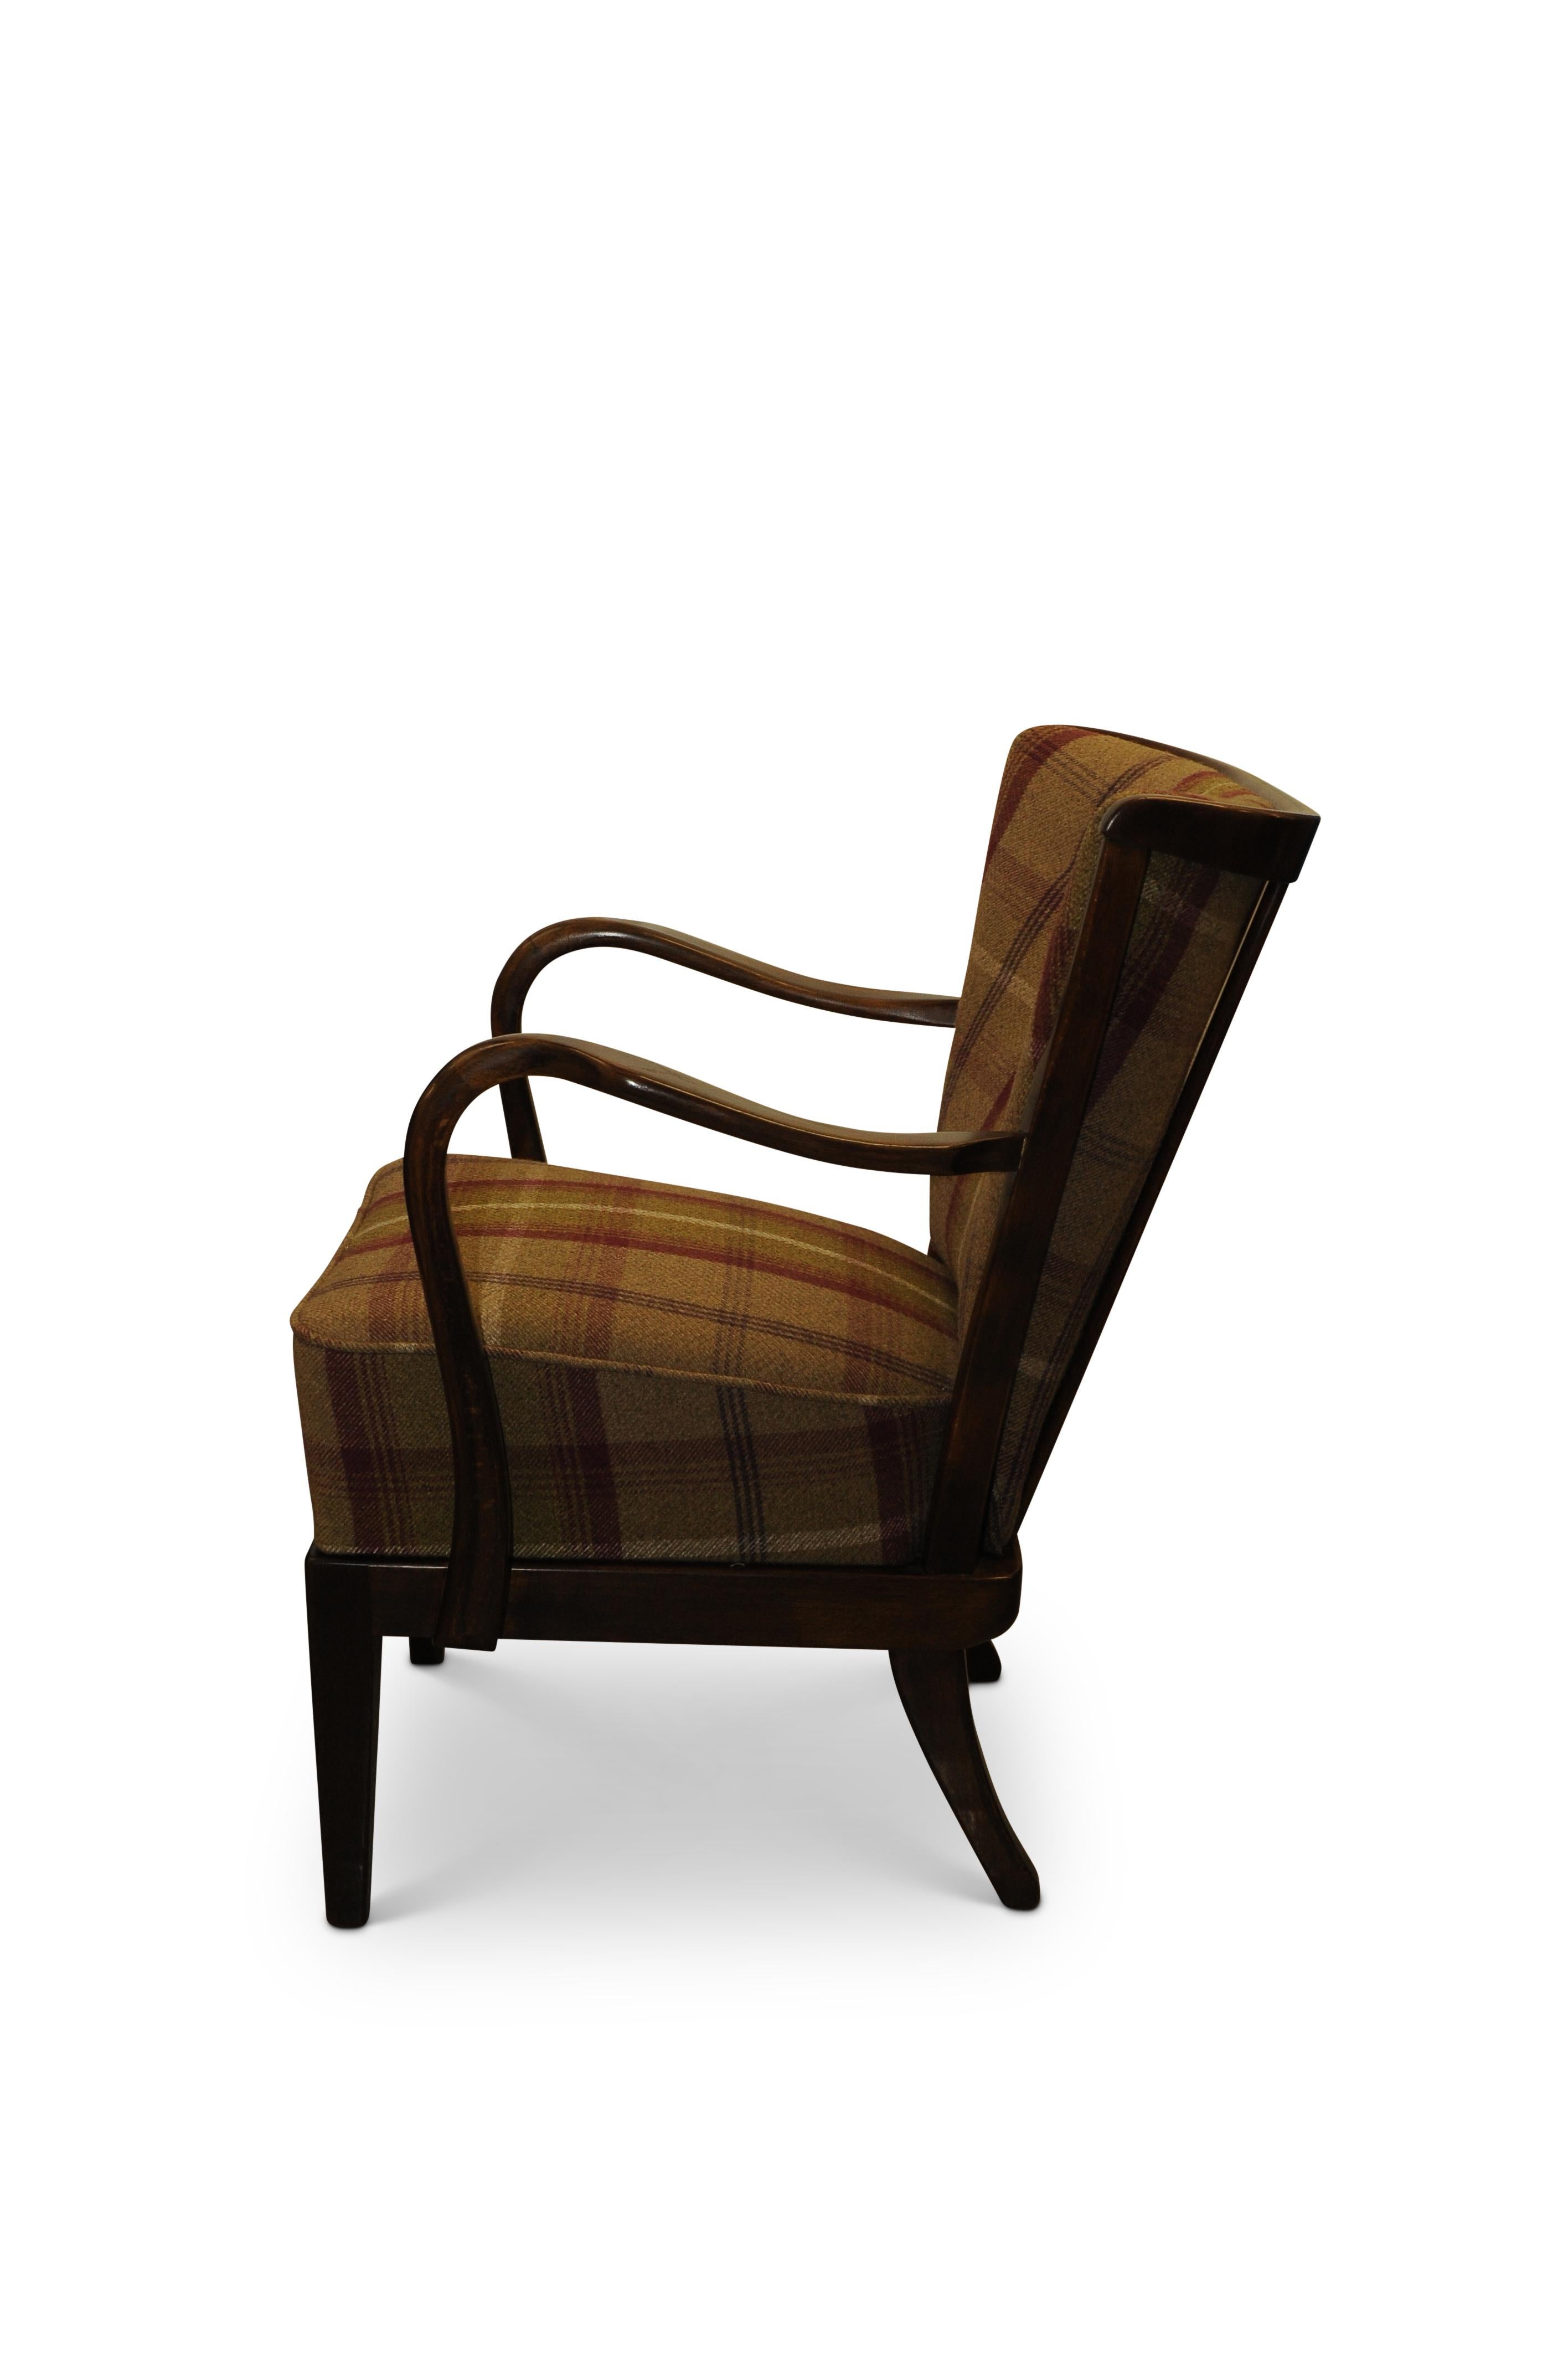 Danish 1930s DUX Scandinavian Art Deco Bentwood Armchair with Patterned Upholstery For Sale